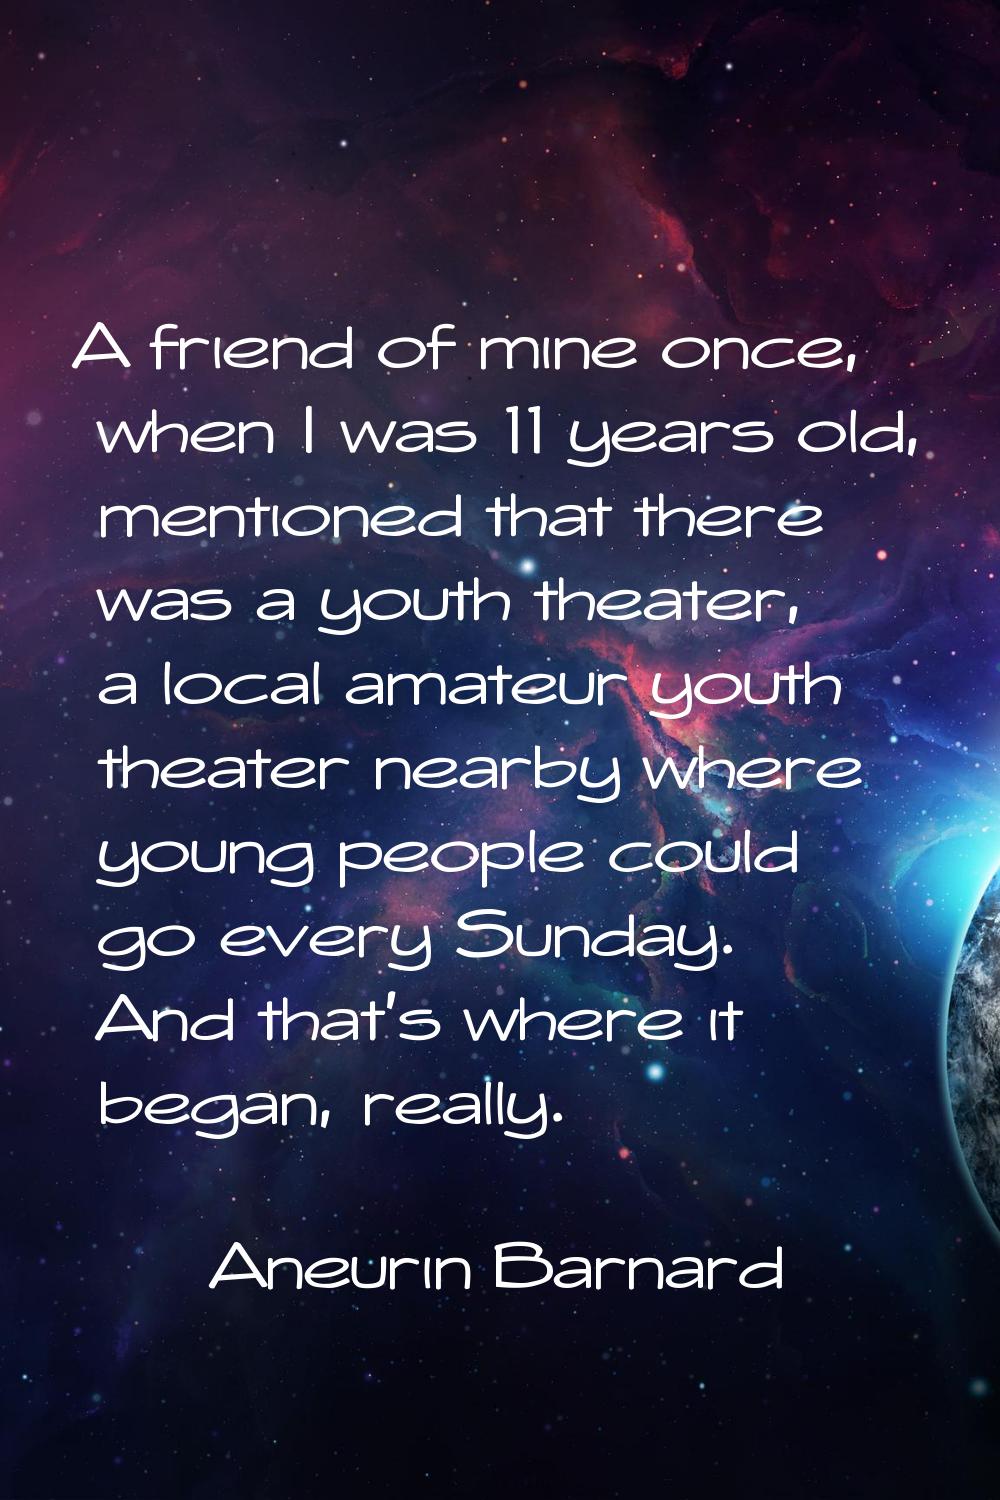 A friend of mine once, when I was 11 years old, mentioned that there was a youth theater, a local a